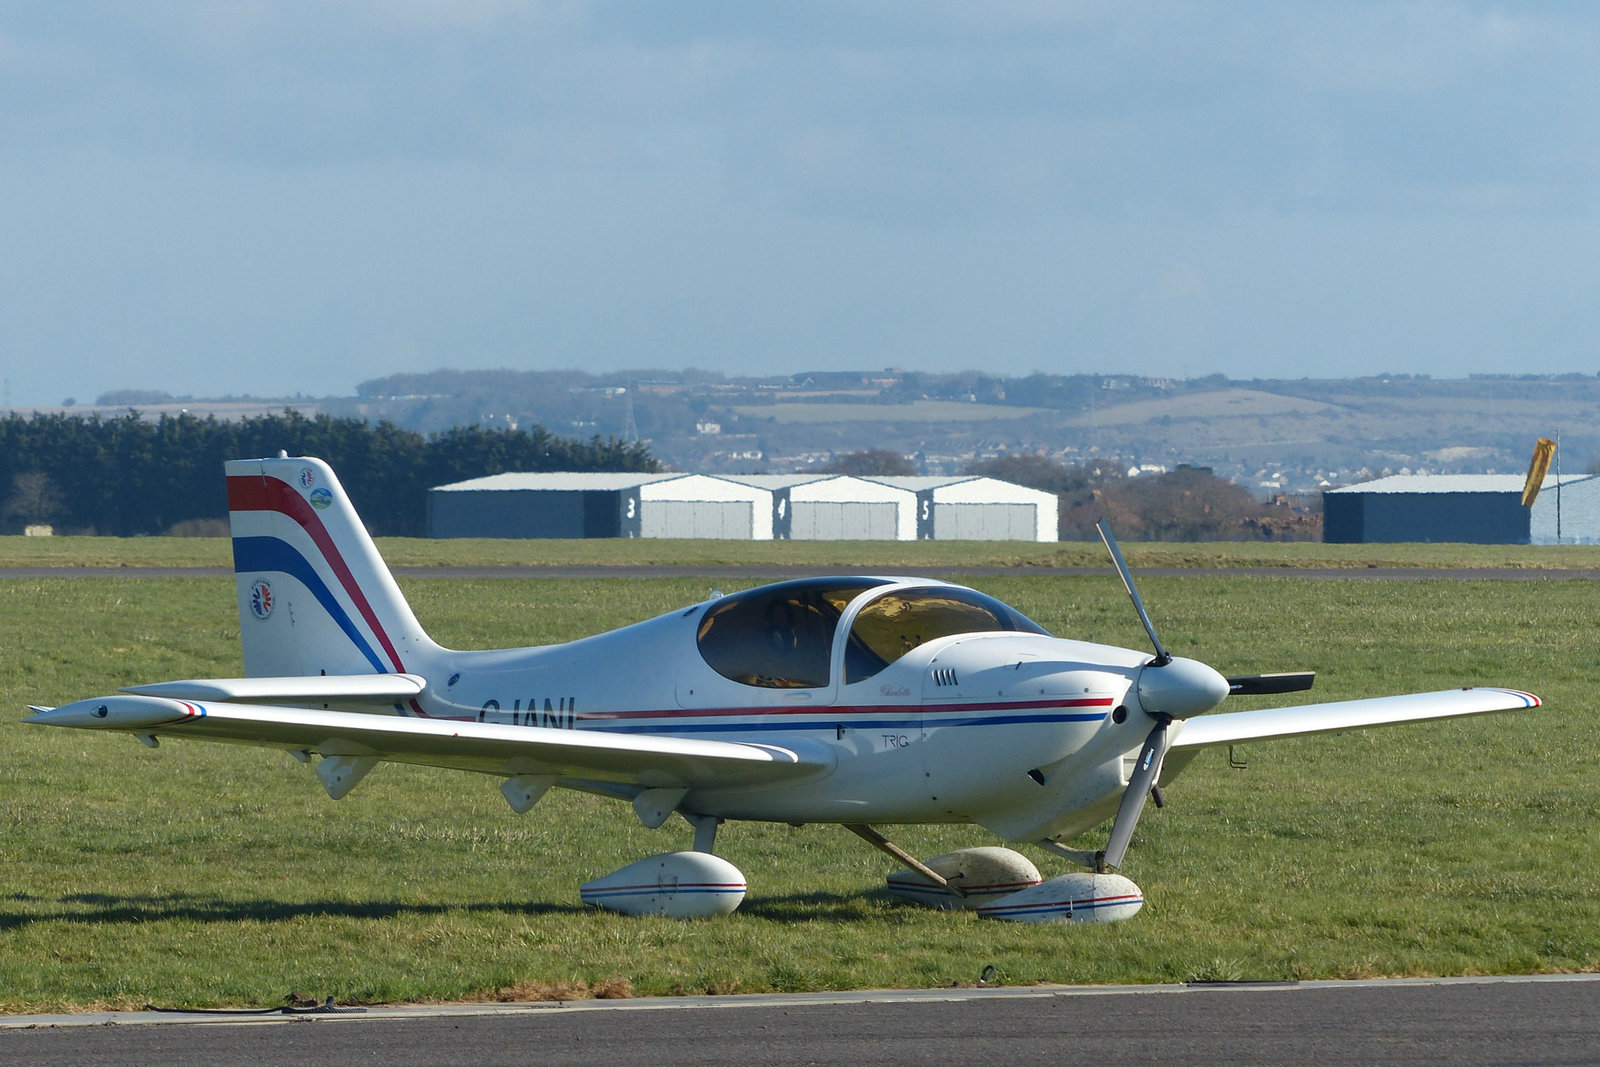 G-IANI at Solent Airport - 17 February 2018